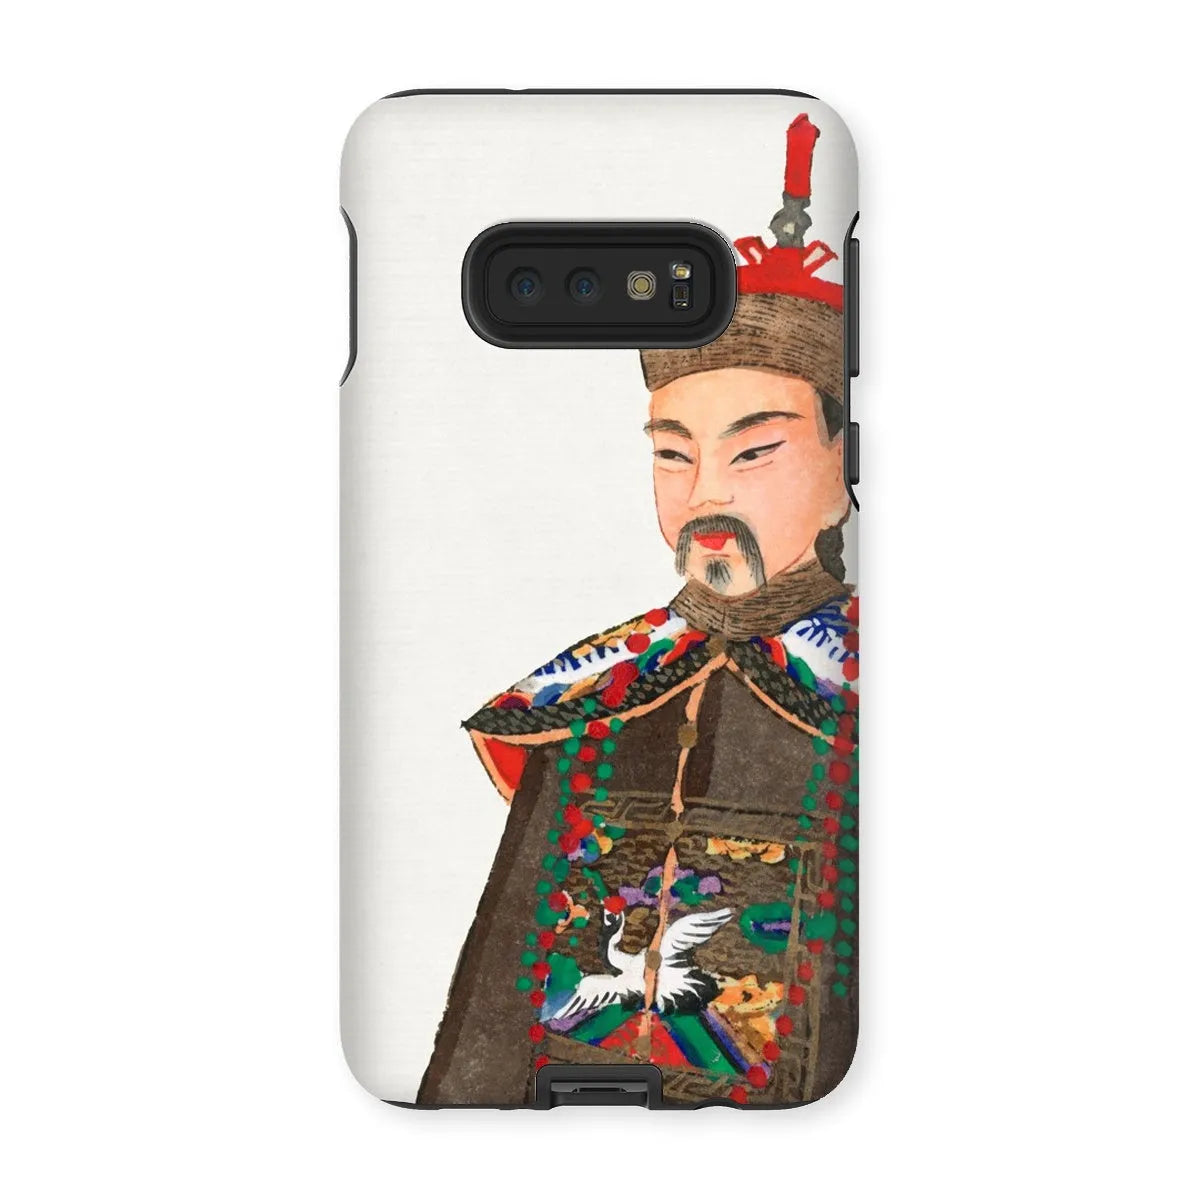 Nobleman At Court - Chinese Aesthetic Manchu Art Phone Case - Samsung Galaxy S10e / Matte - Mobile Phone Cases